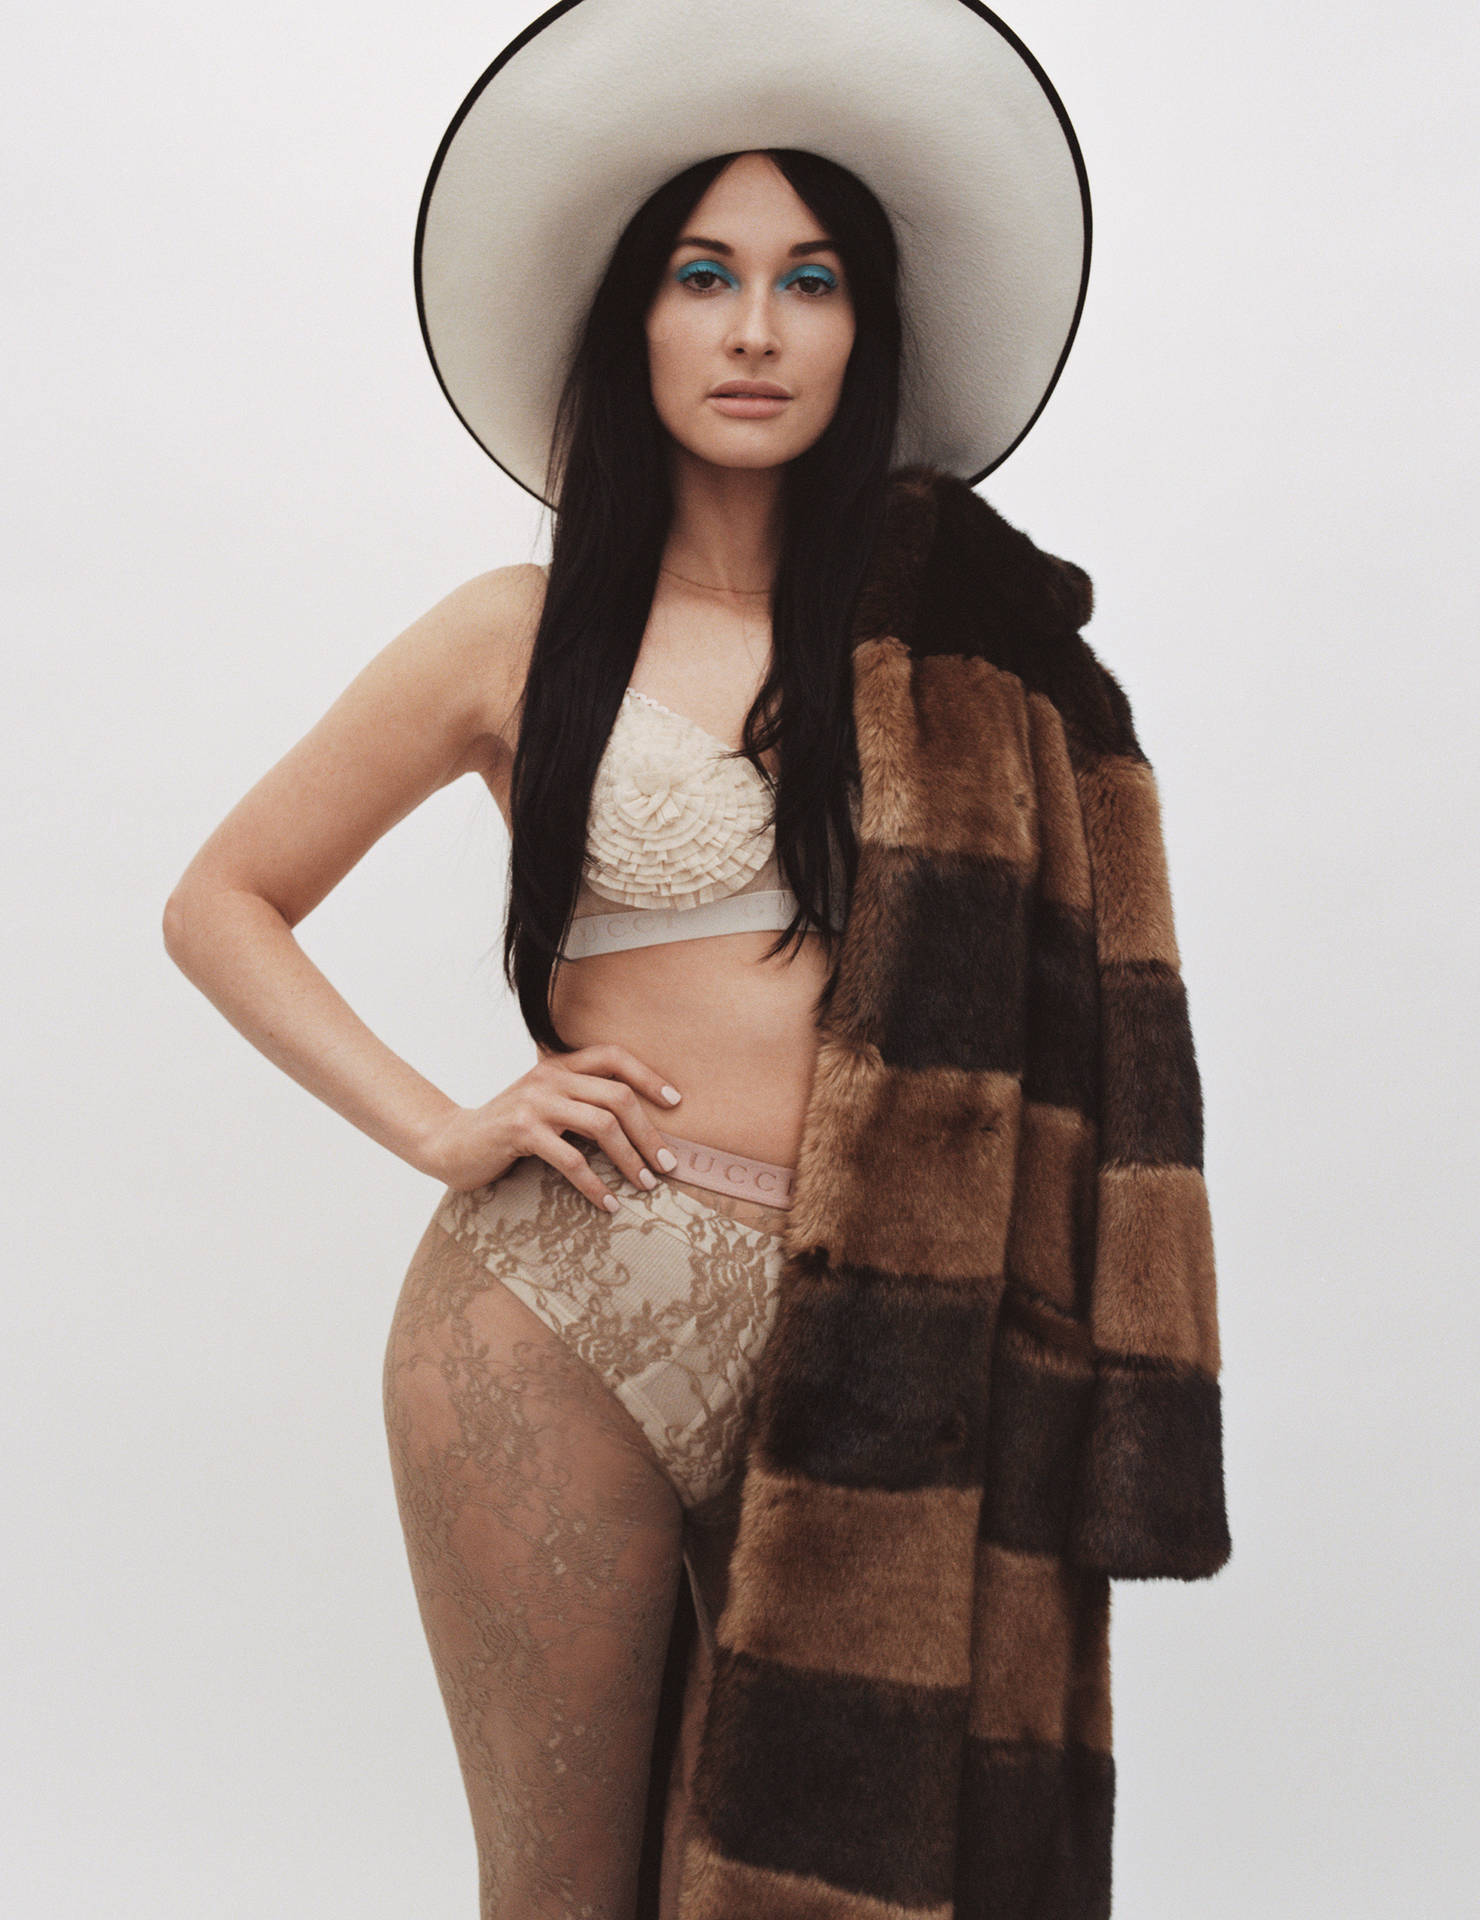 Kacey Musgraves Vogue Photoshoot Background